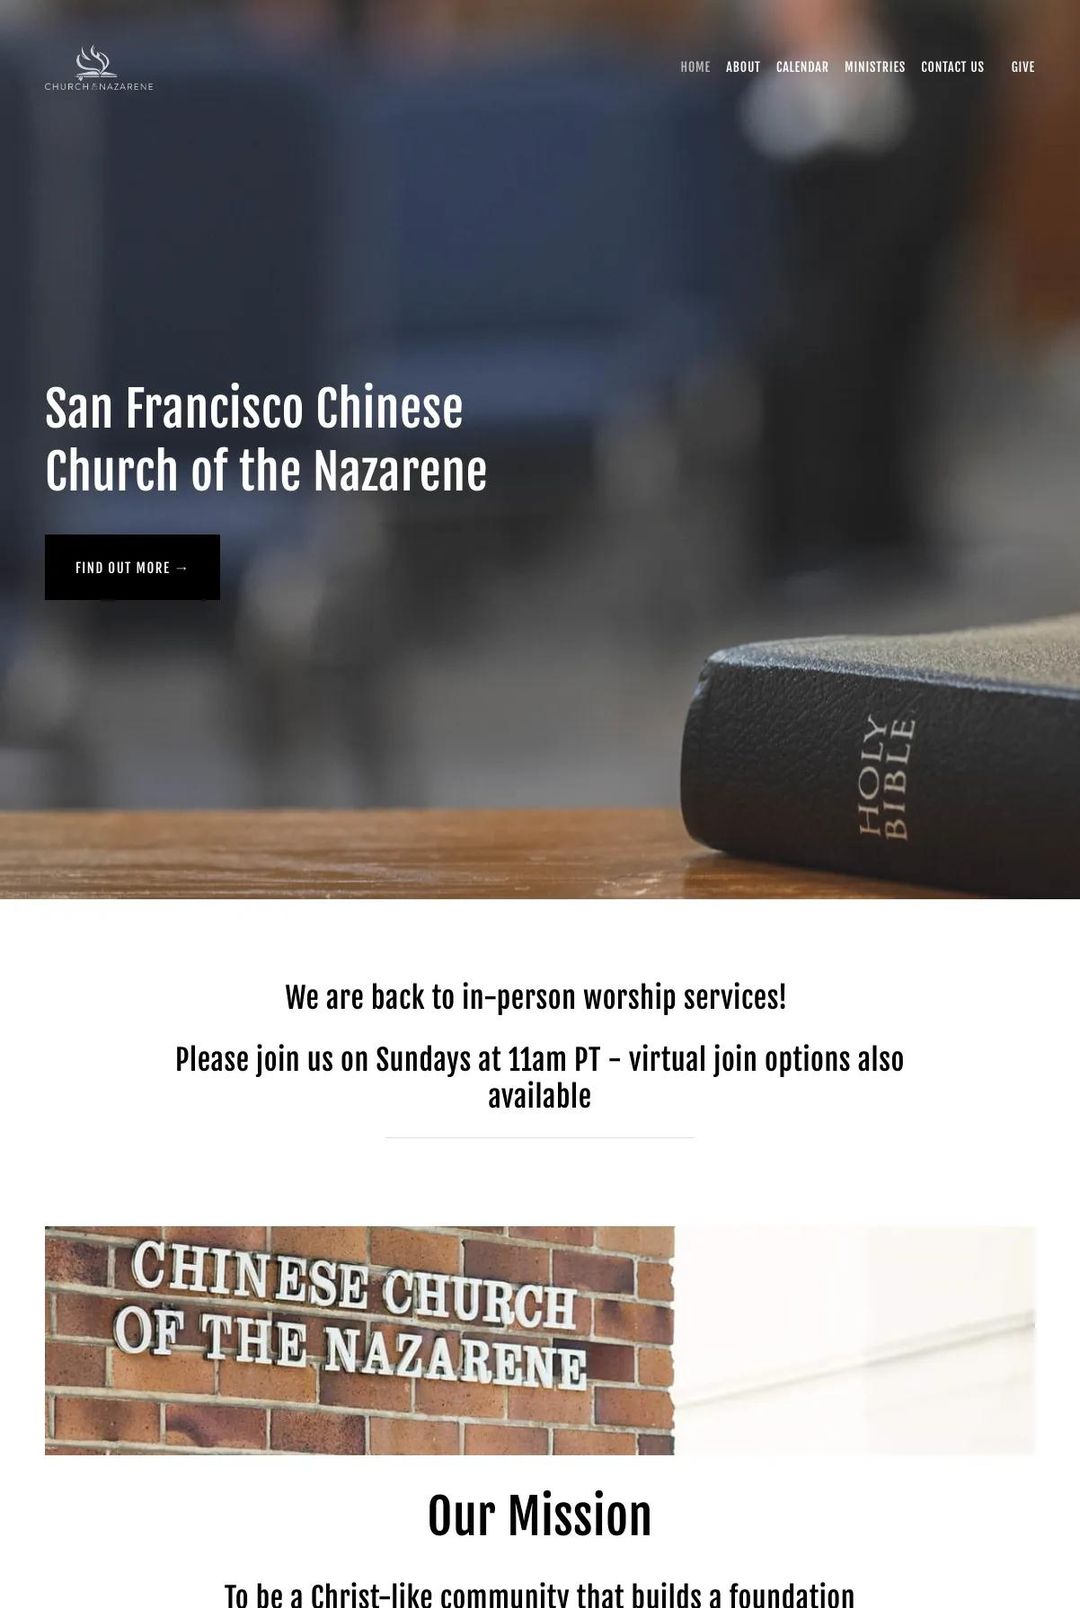 Screenshot 1 of San Francisco Chinese Church of the Nazarene (Example Squarespace Church Website)